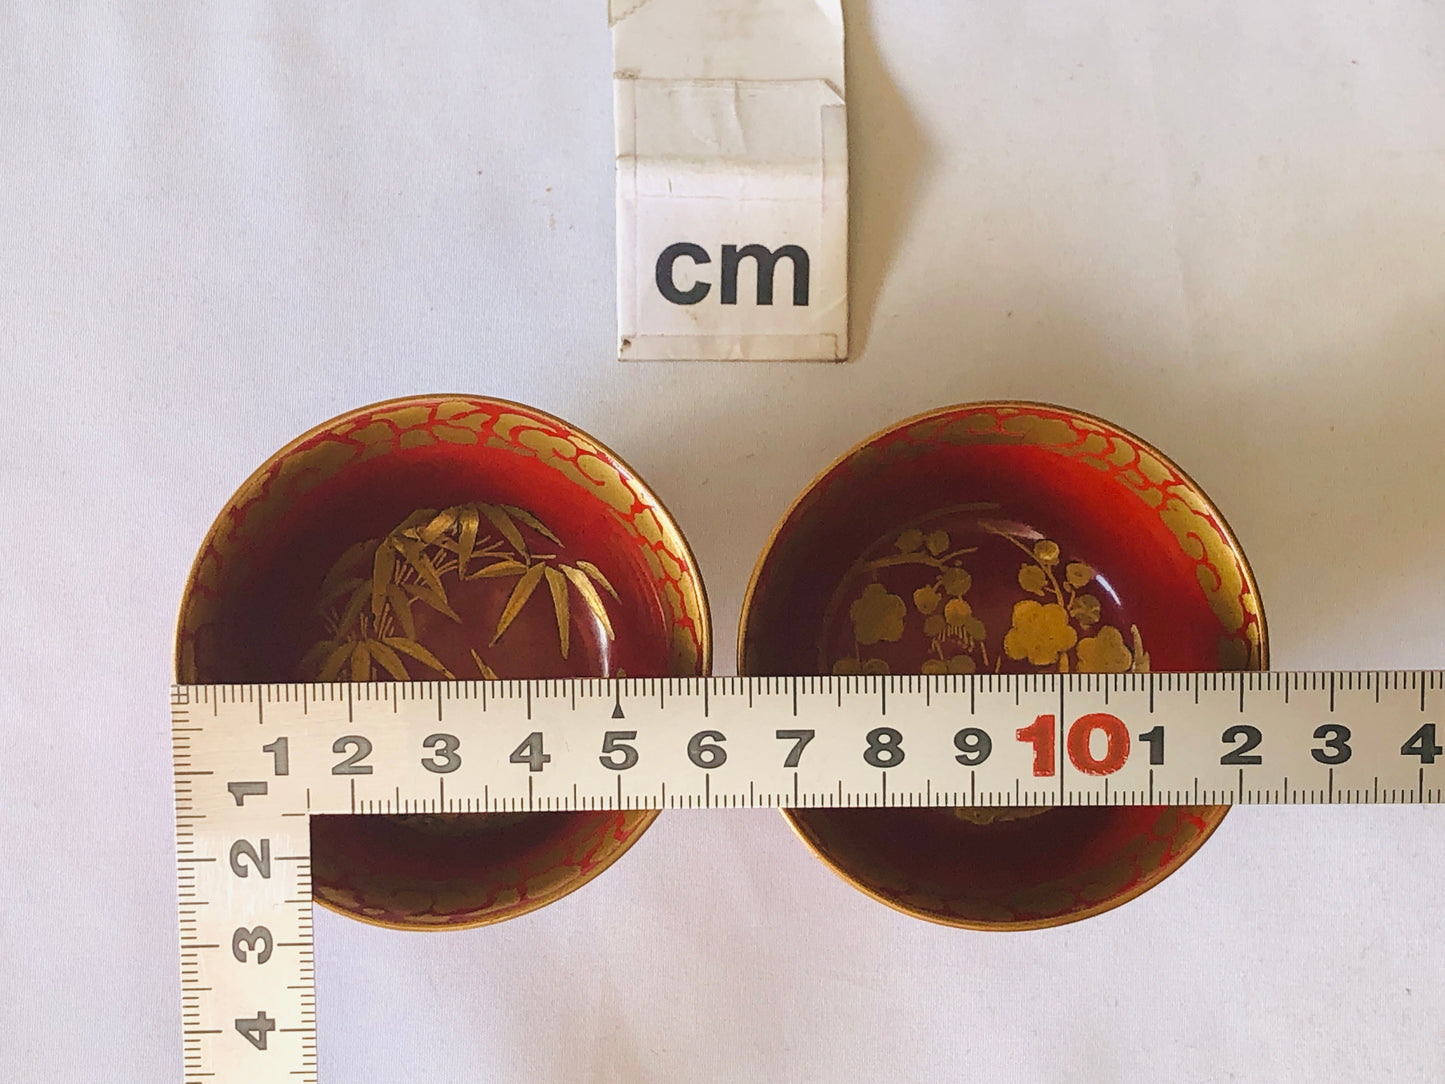 Y4957 CHAWAN sake cup set of 2 box vermillion gold makie lacquer Japan antique